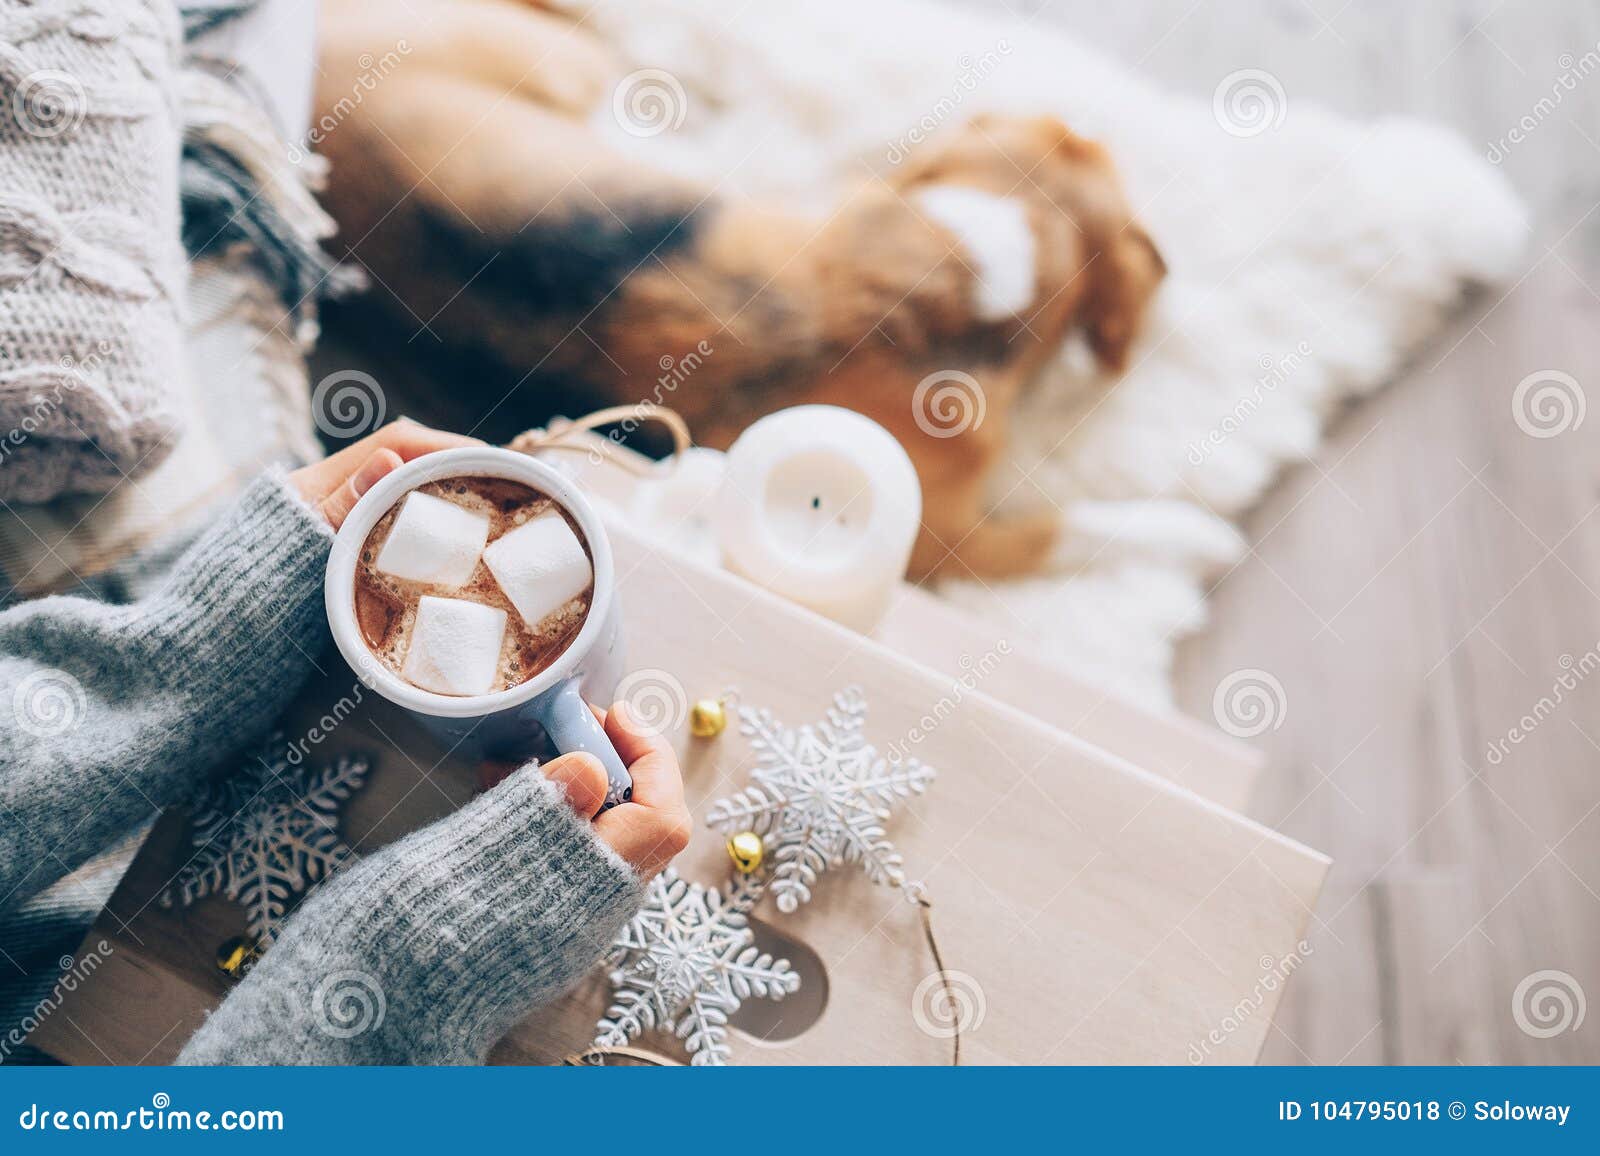 woman hands ith cup of hot chocolate close up image, cozy home,